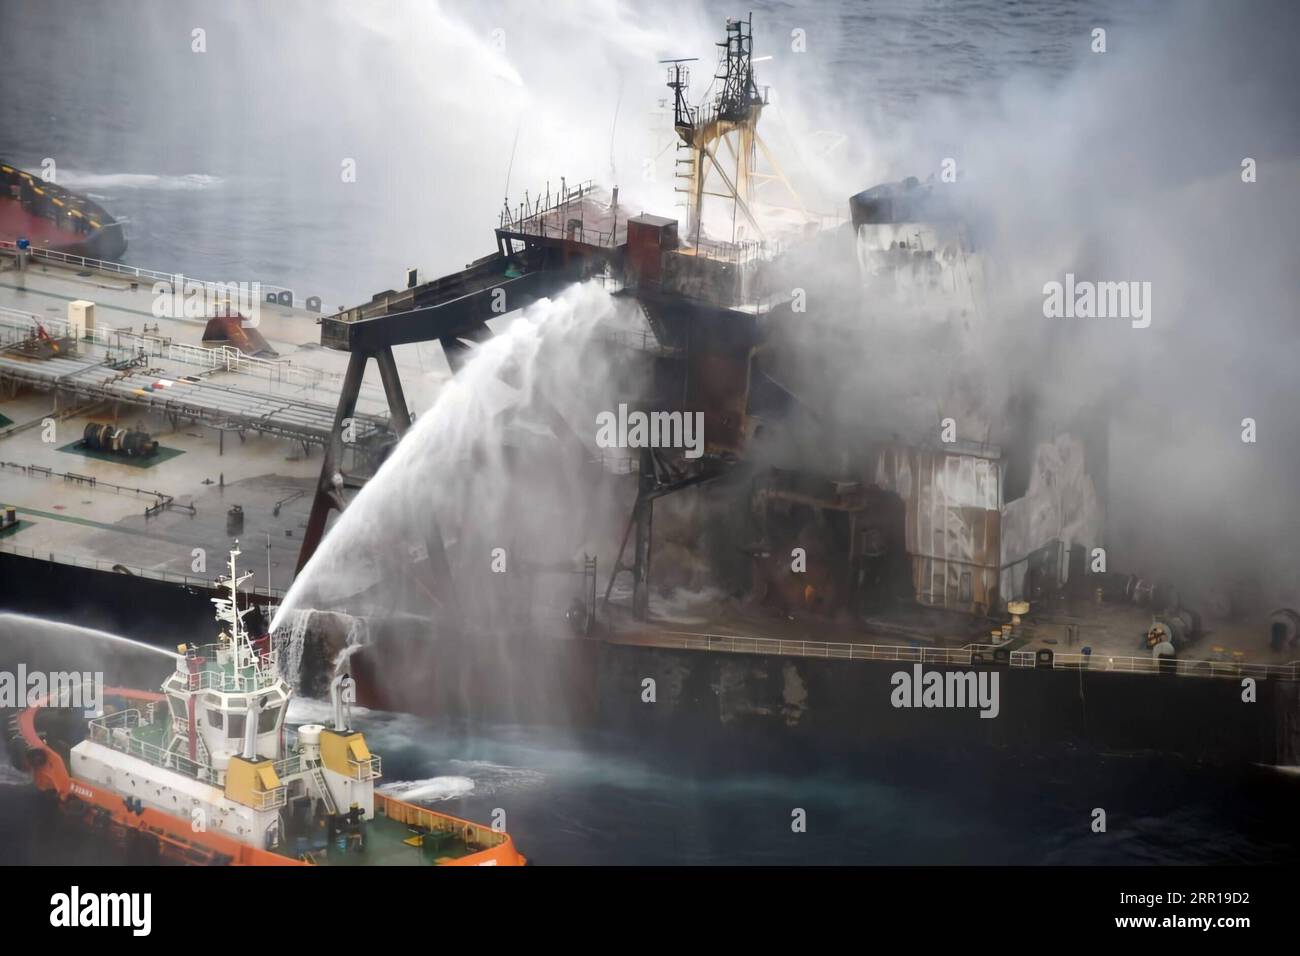 200909 -- COLOMBO, Sept. 9, 2020 -- Fireboats extinguish fire of the MT New Diamond oil tanker in the seas off Sri Lanka s eastern coast, on Sept. 8, 2020. The Sri Lanka Navy on Wednesday said a fire which had reignited onboard the MT New Diamond oil tanker on Monday has been brought under control and the distressed ship was being towed further away towards safe waters by a tug boat. /Handout via Xinhua SRI LANKA-OIL TANKER-FIRE SrixLankaxAirxForcexMedia PUBLICATIONxNOTxINxCHN Stock Photo